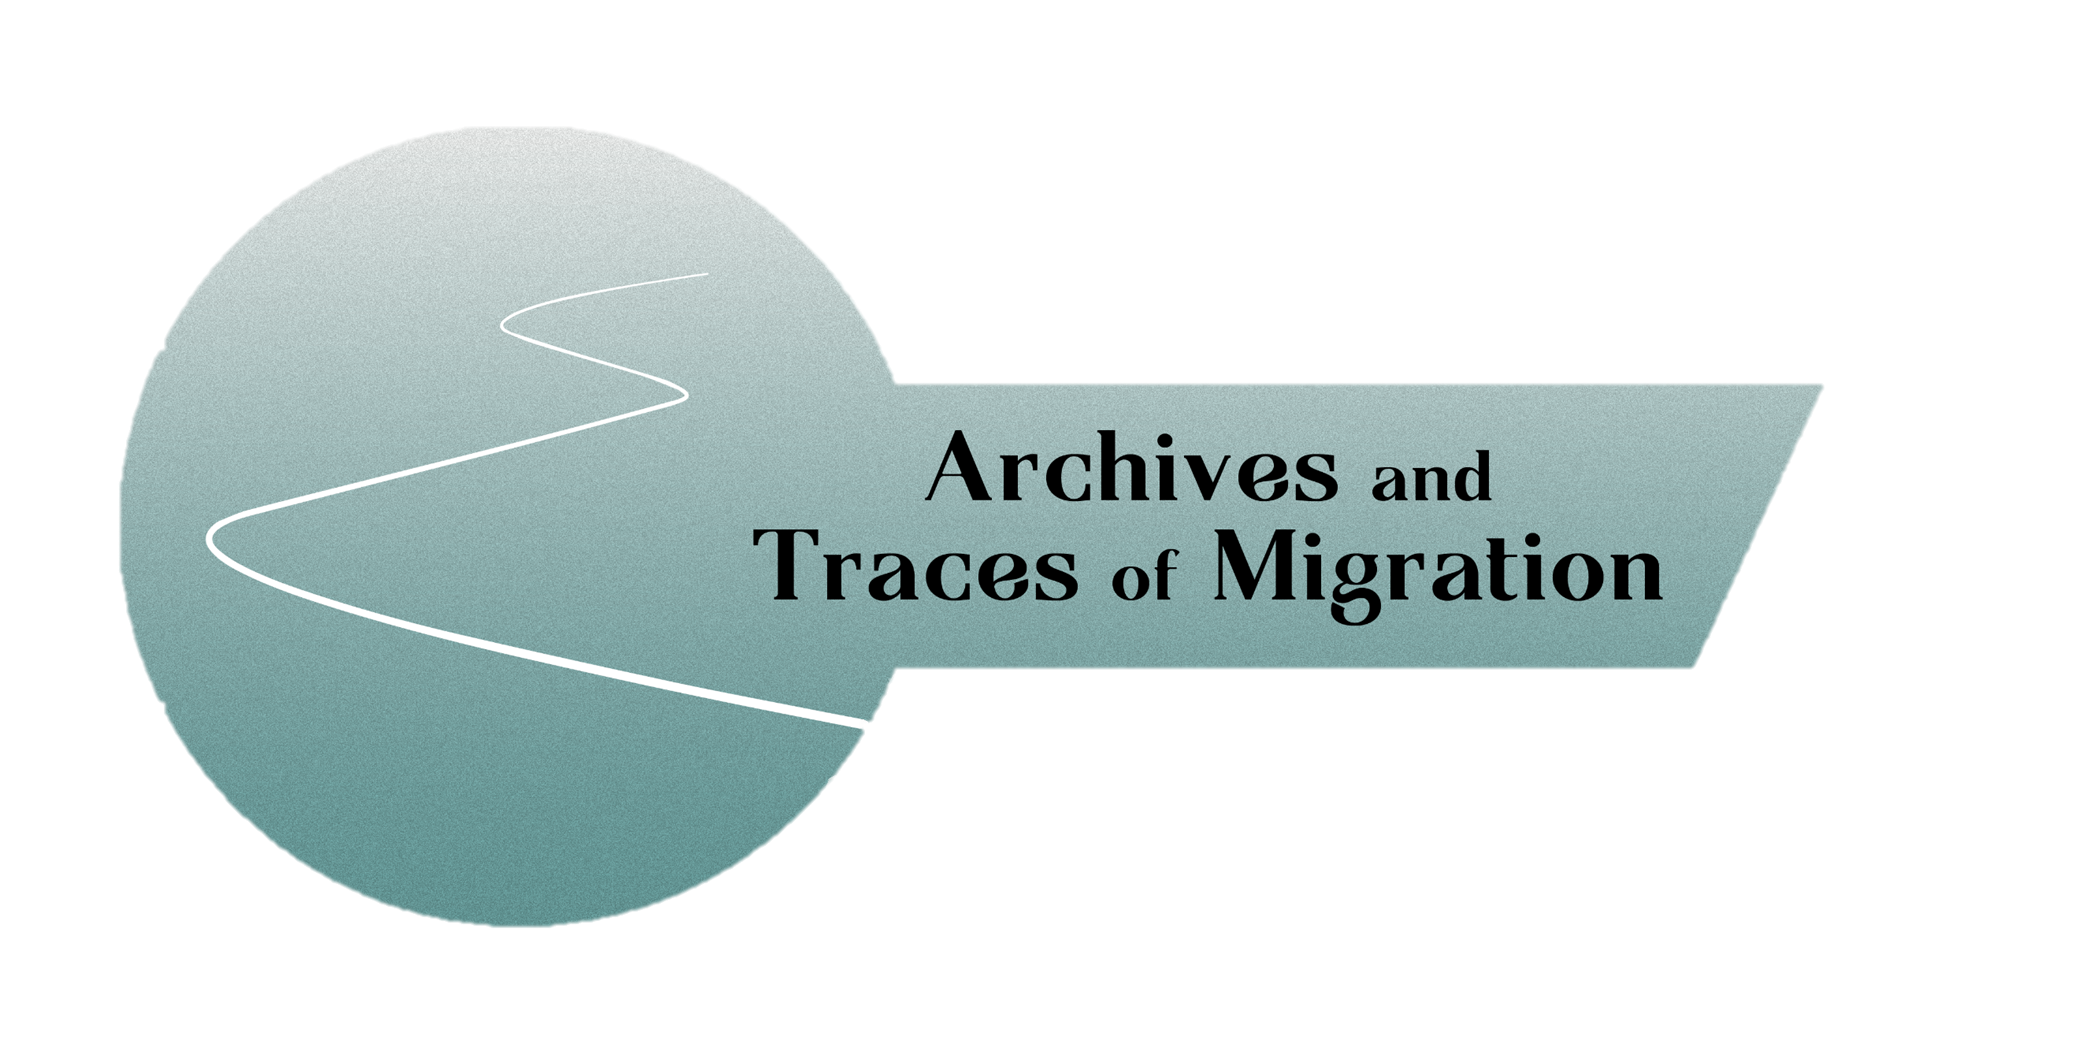 Archives and Traces of Migration